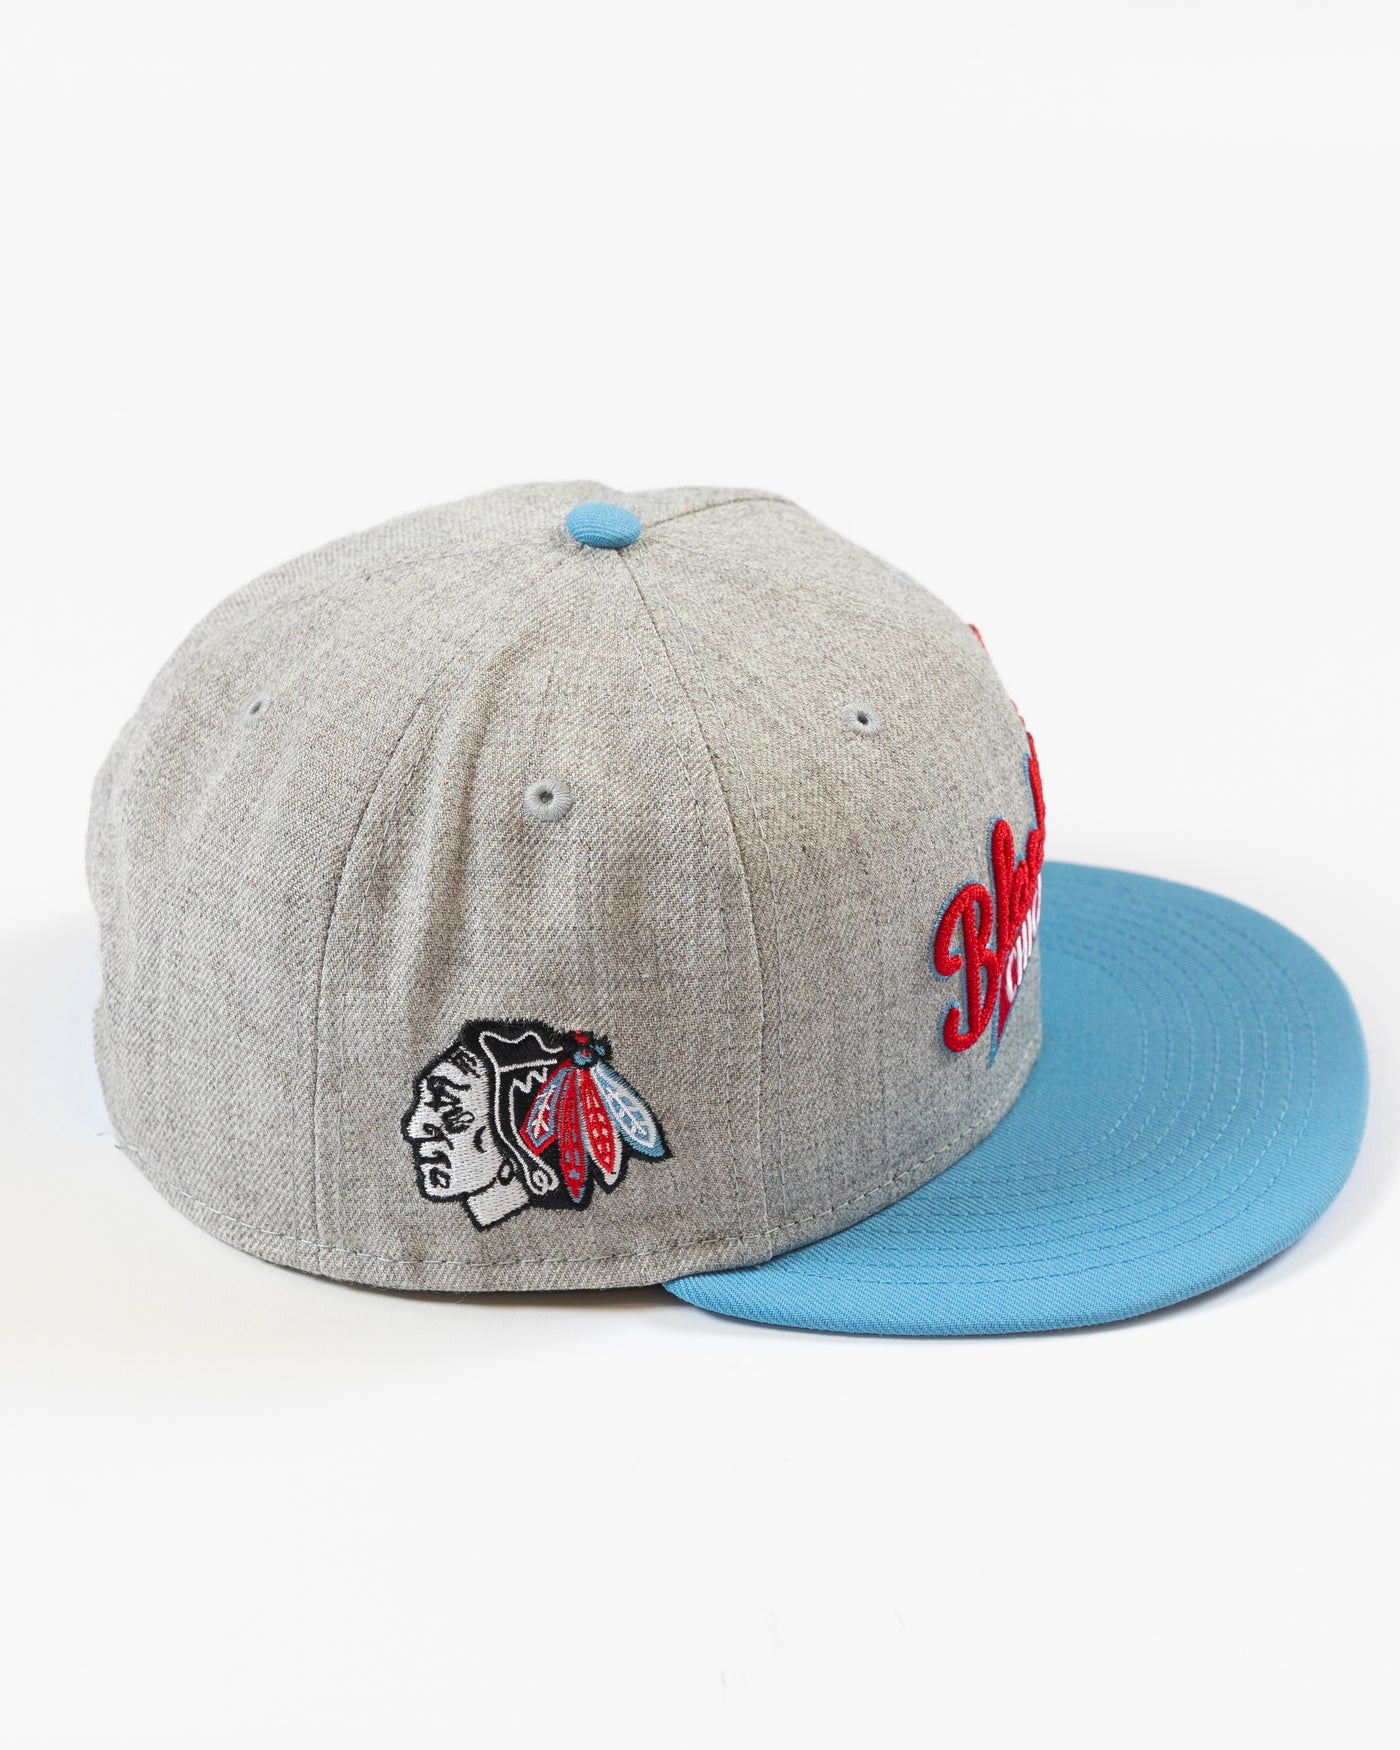 New Era grey and blue Blackhawks Chicago wordmark snapback - alt right side view with primary logo